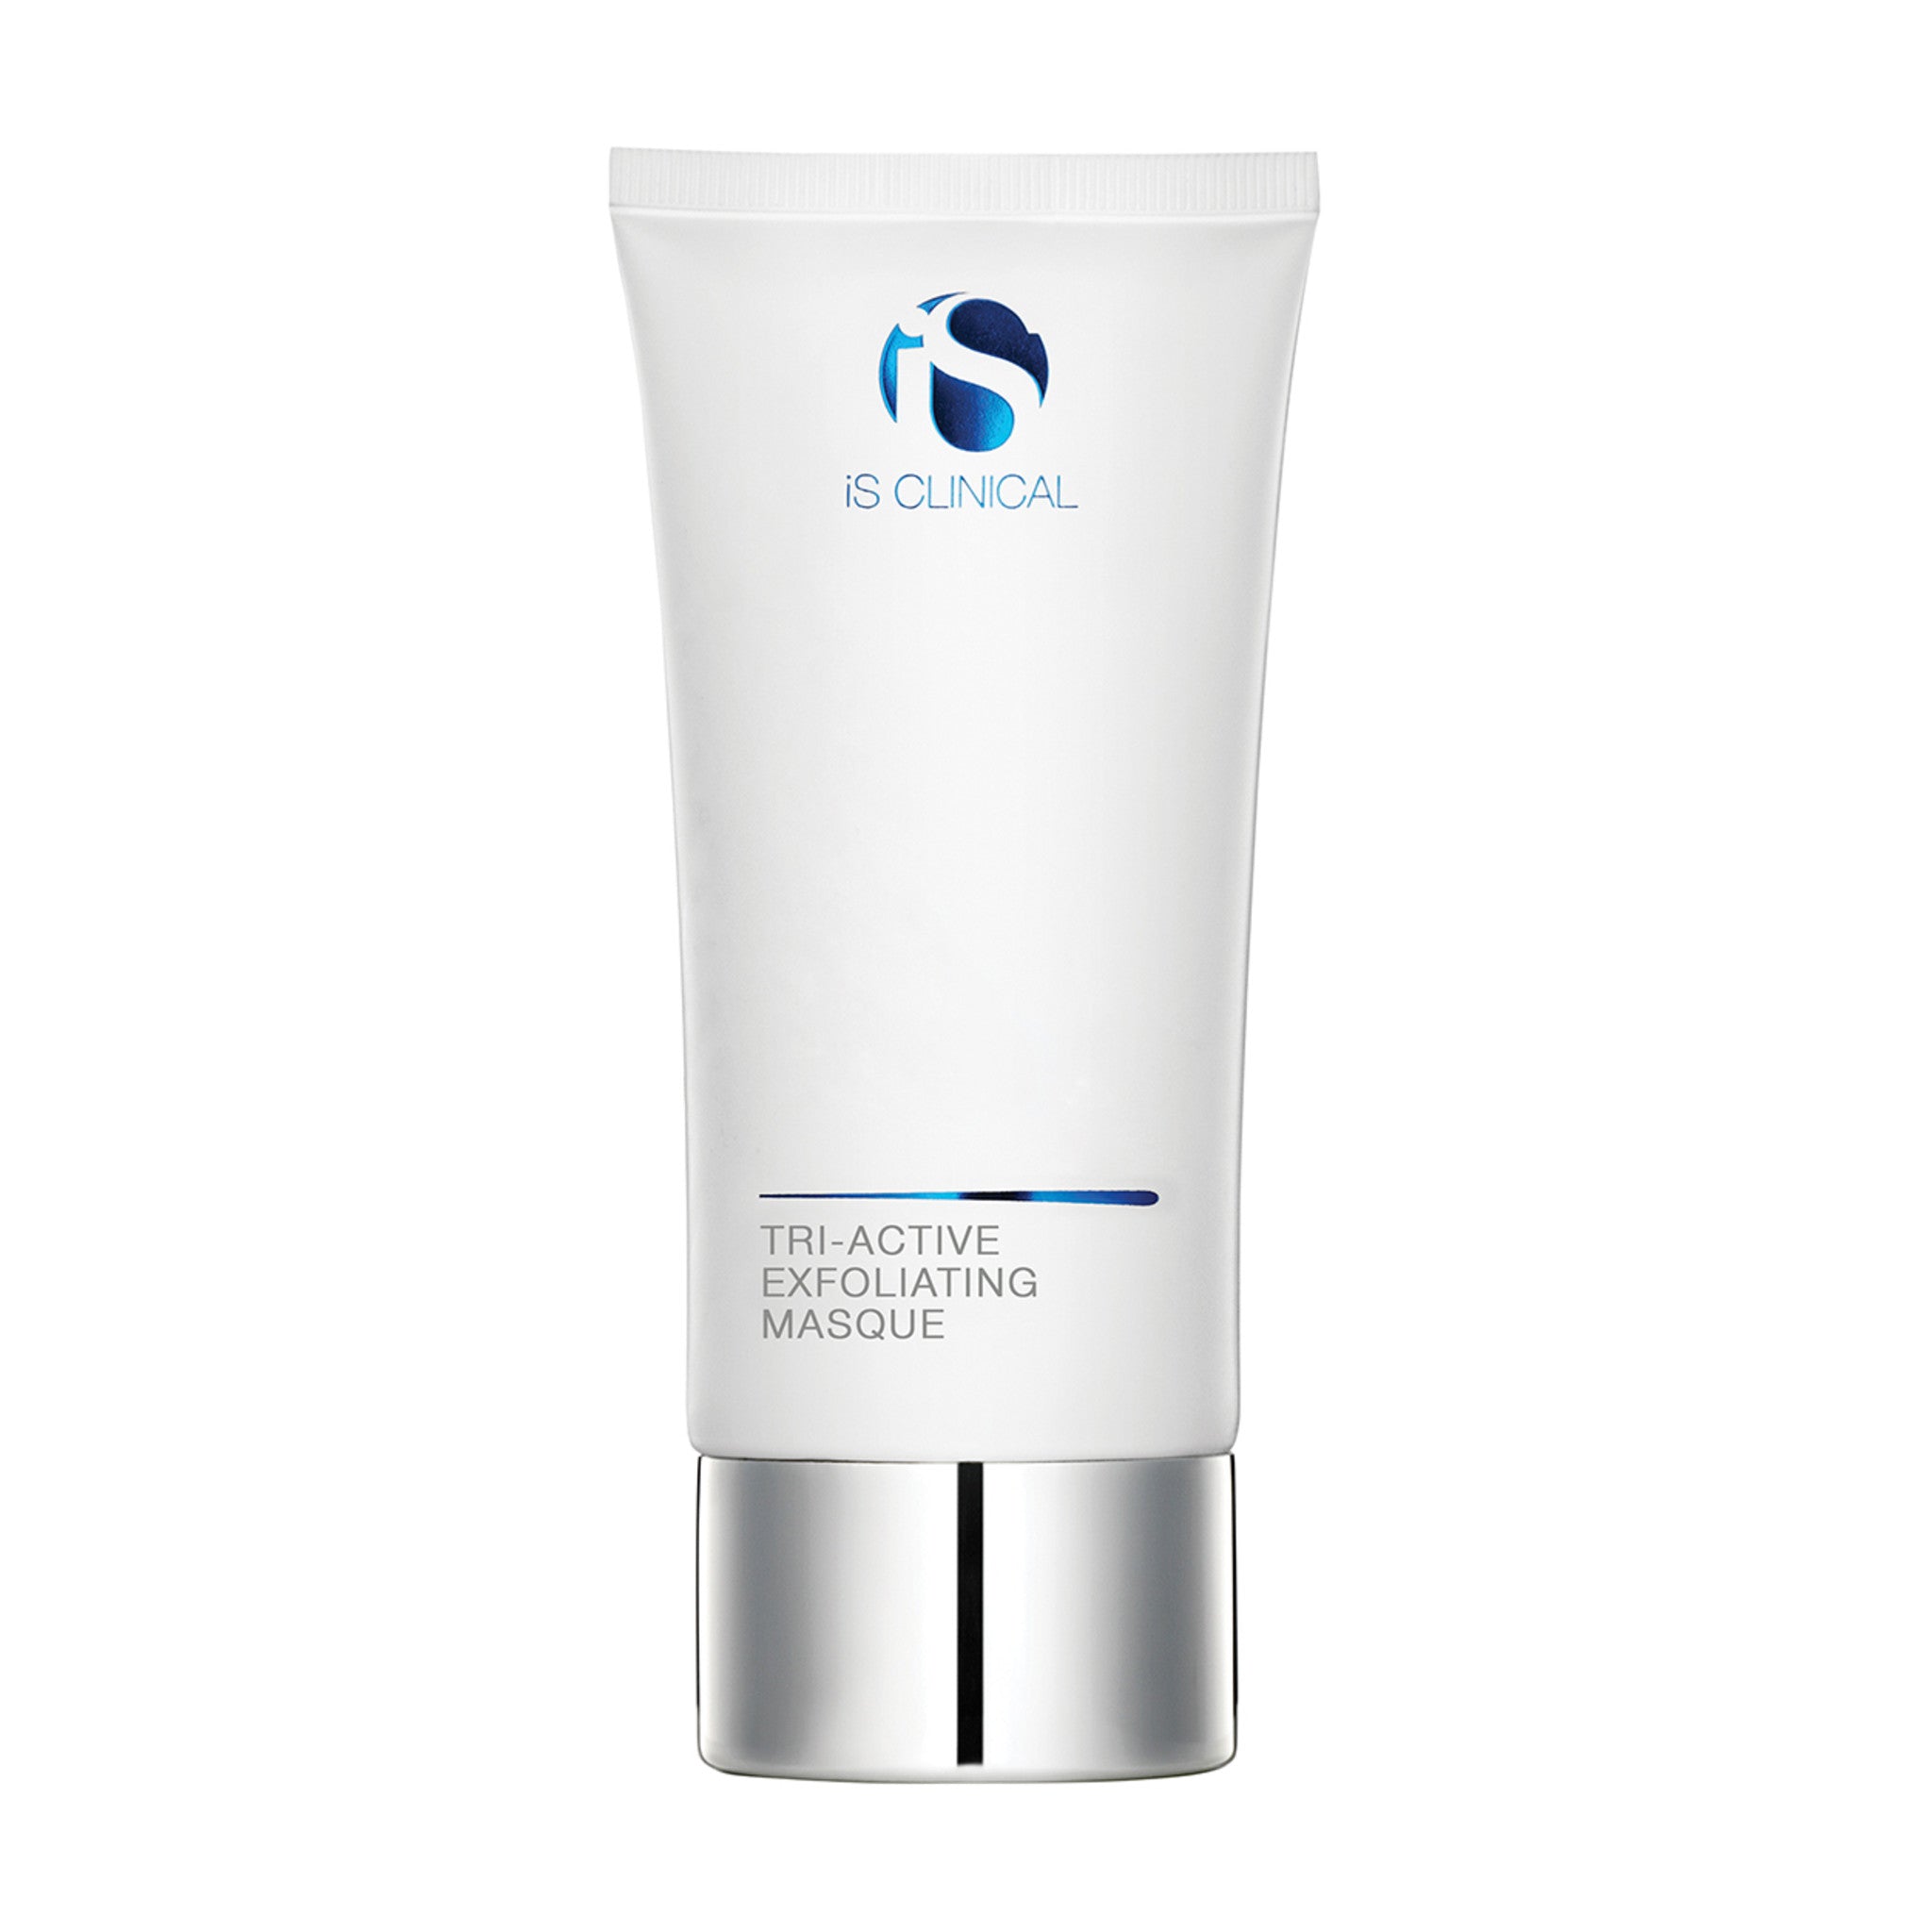 IS Clinical Tri-Active Exfoliating Masque main image.